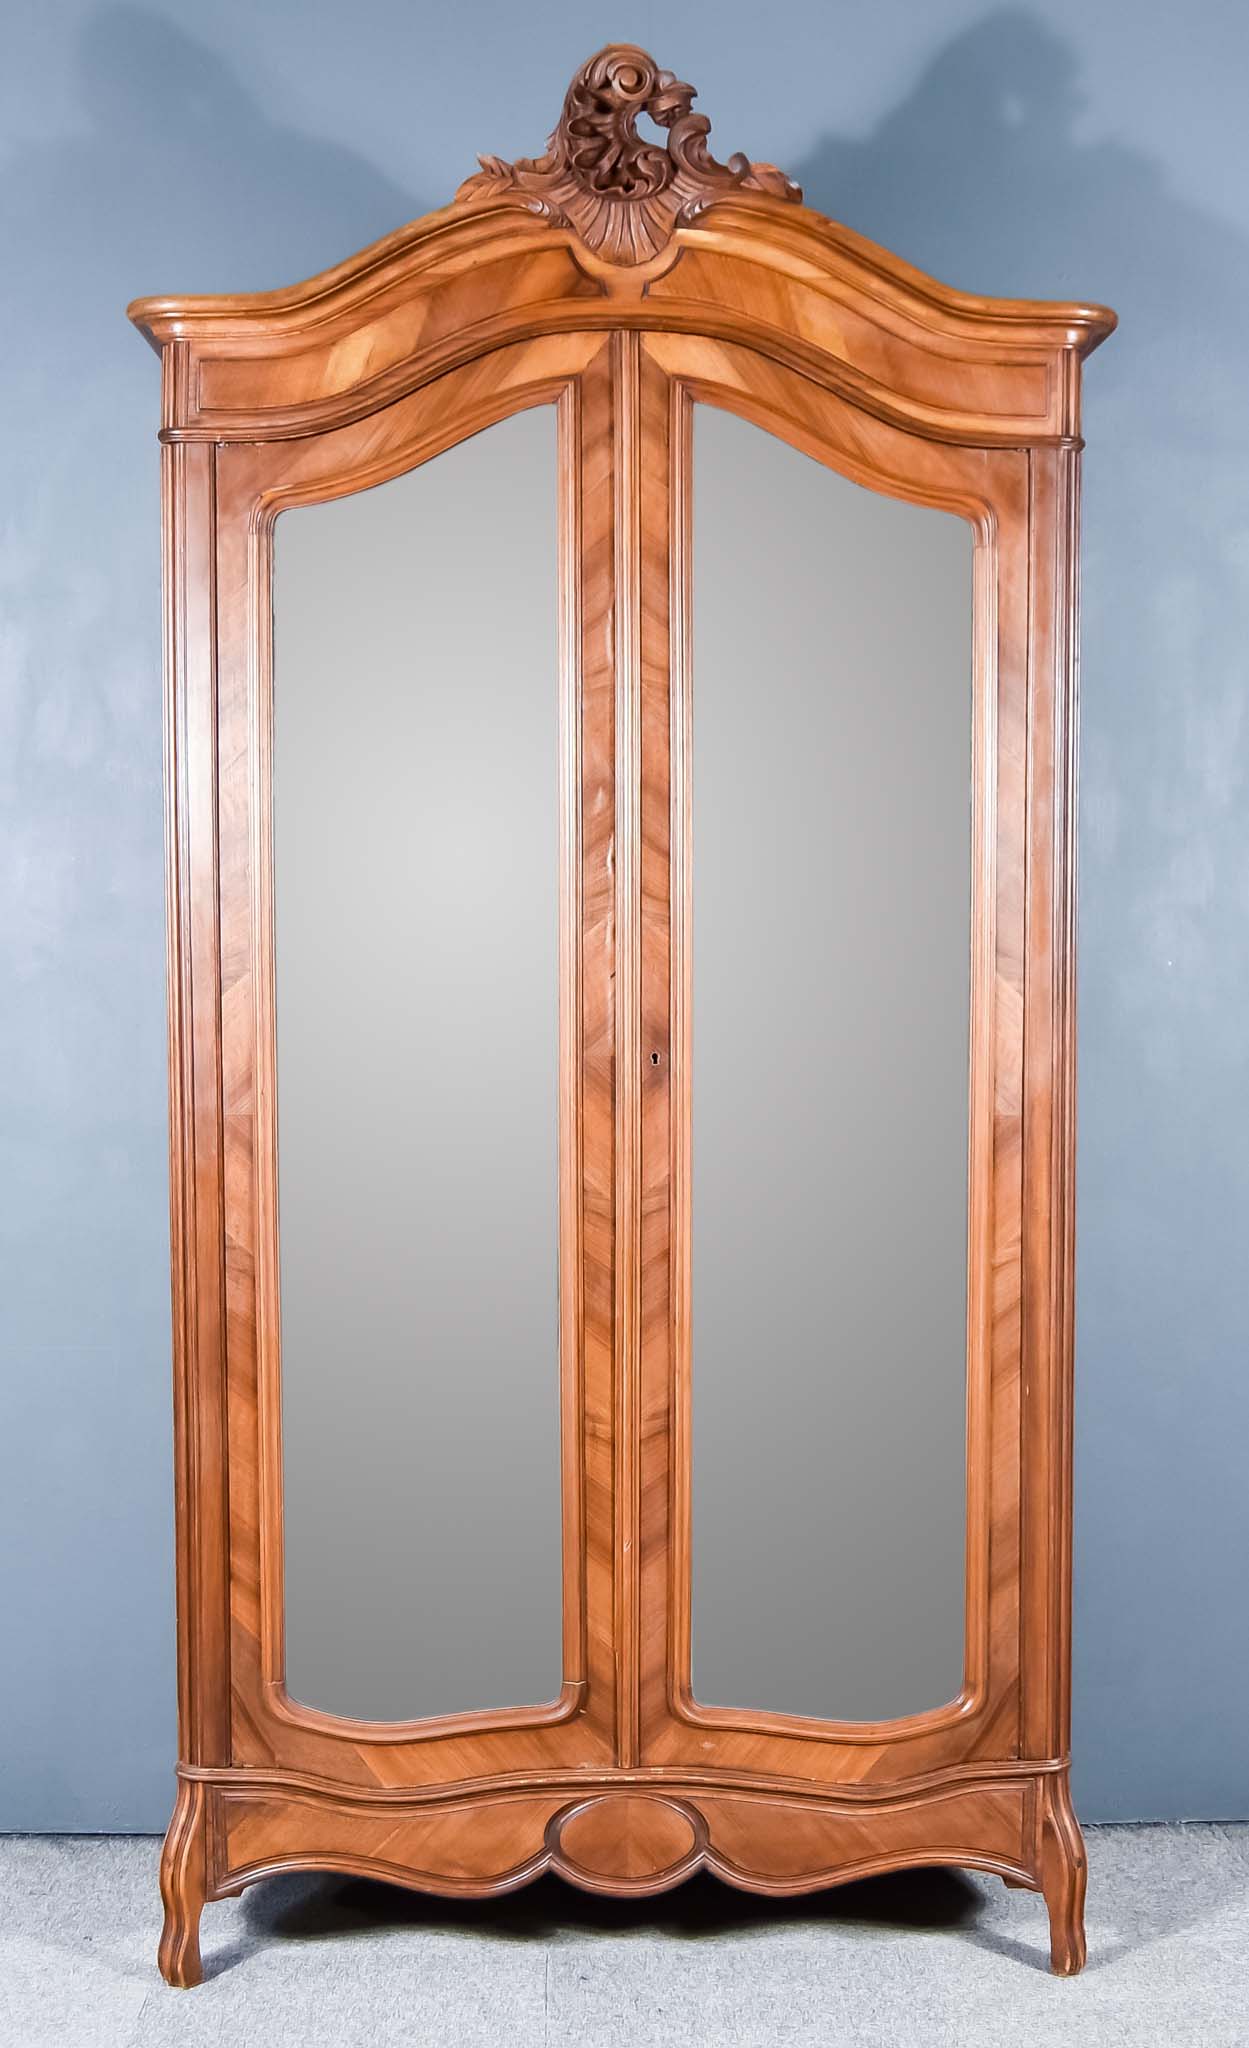 A Late 19th/Early 20th Century French Kingwood and Marquetry Armoire, with moulded and shell and